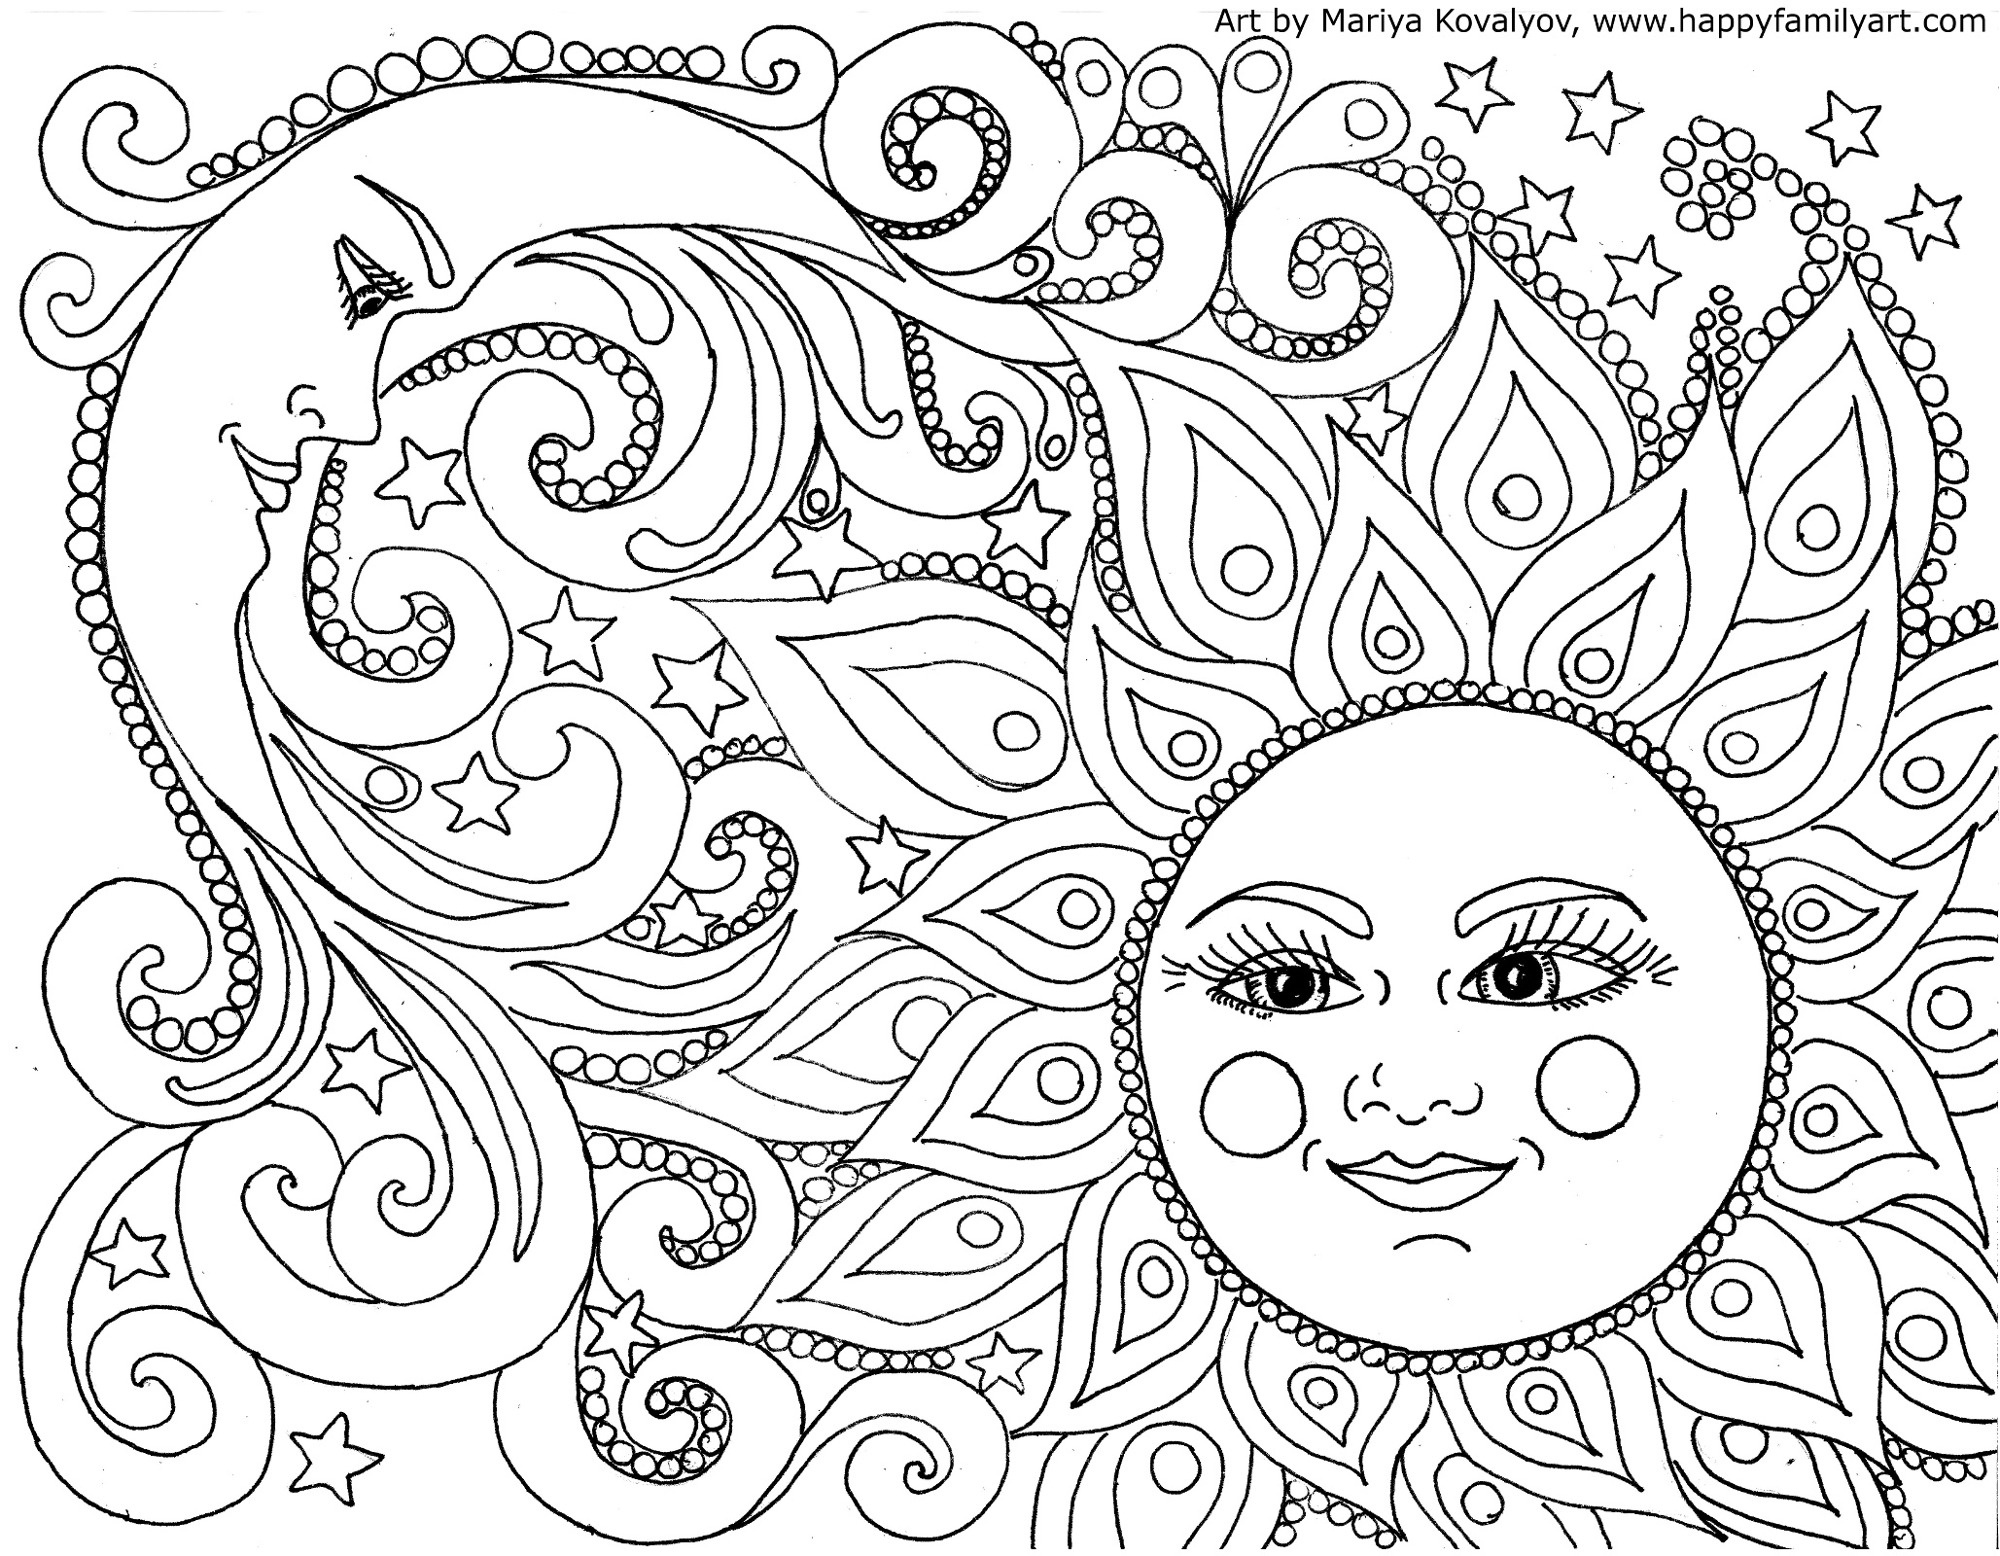 Happy Family Art - Original And Fun Coloring Pages - Free Printable Coloring Cards For Adults